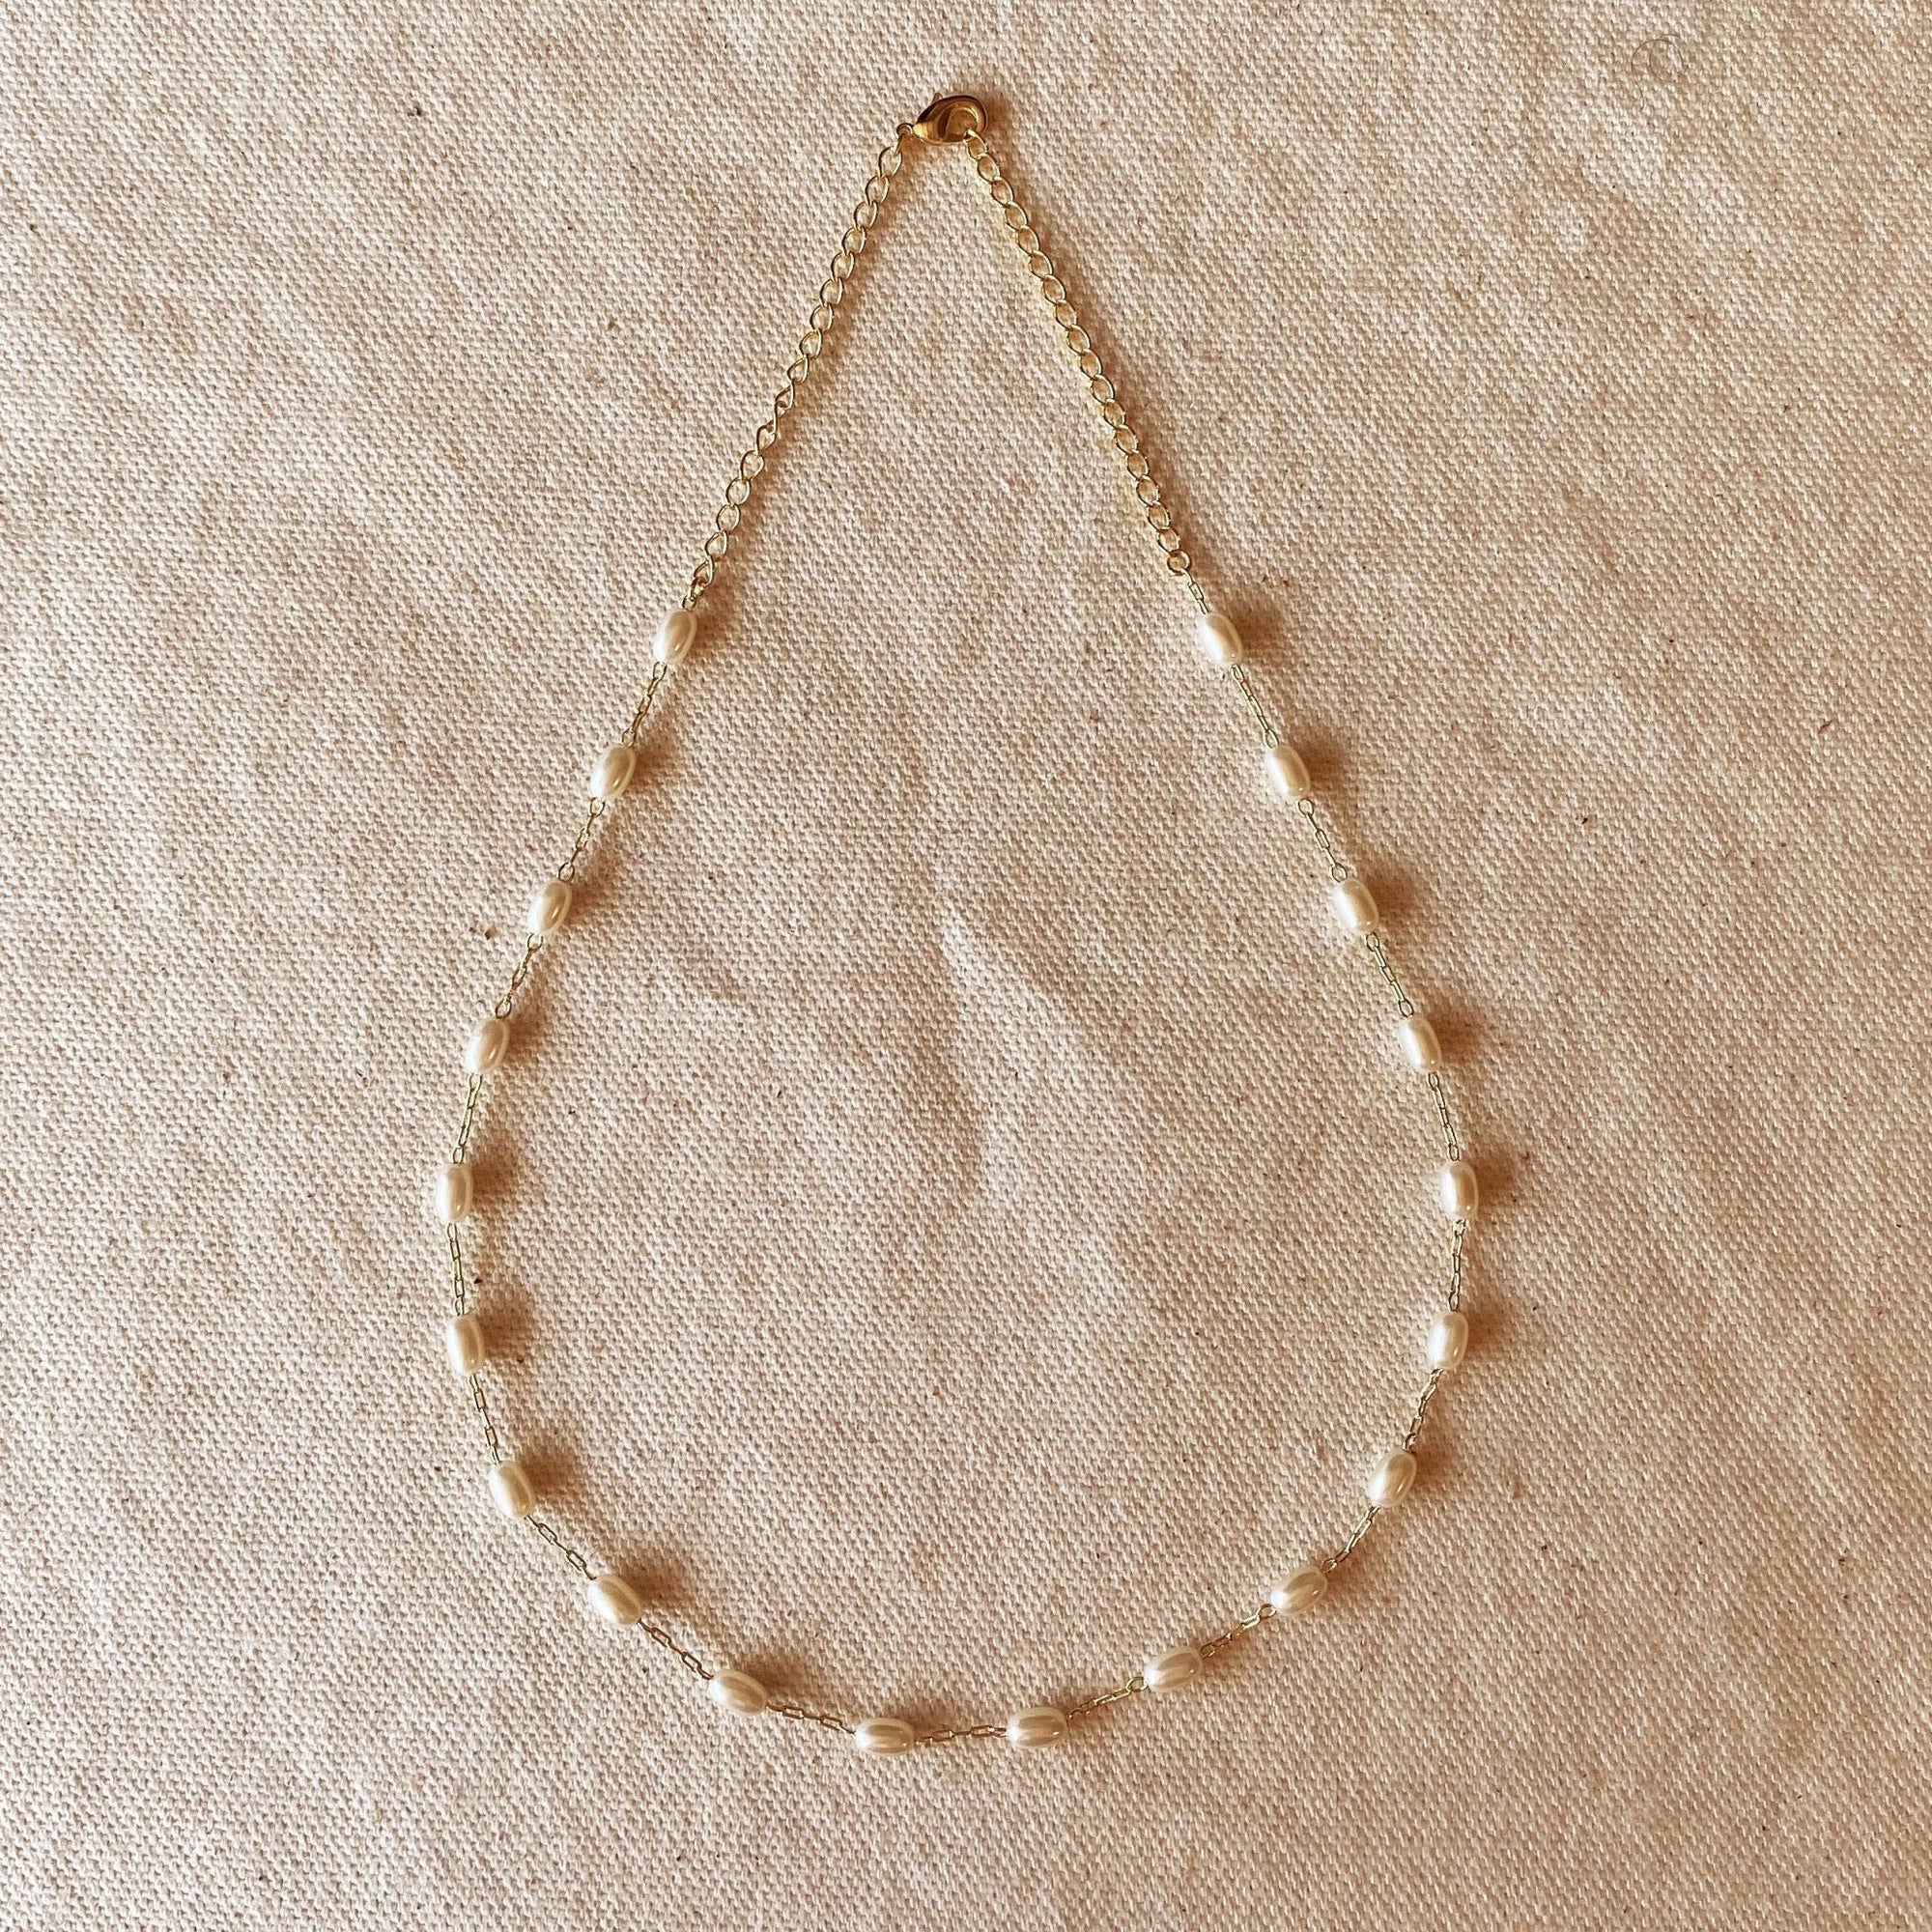 Oval Shaped Simulated Pearl Chocker Necklace, 18k Gold Filled, Abigail Fox - Abigail Fox Designs